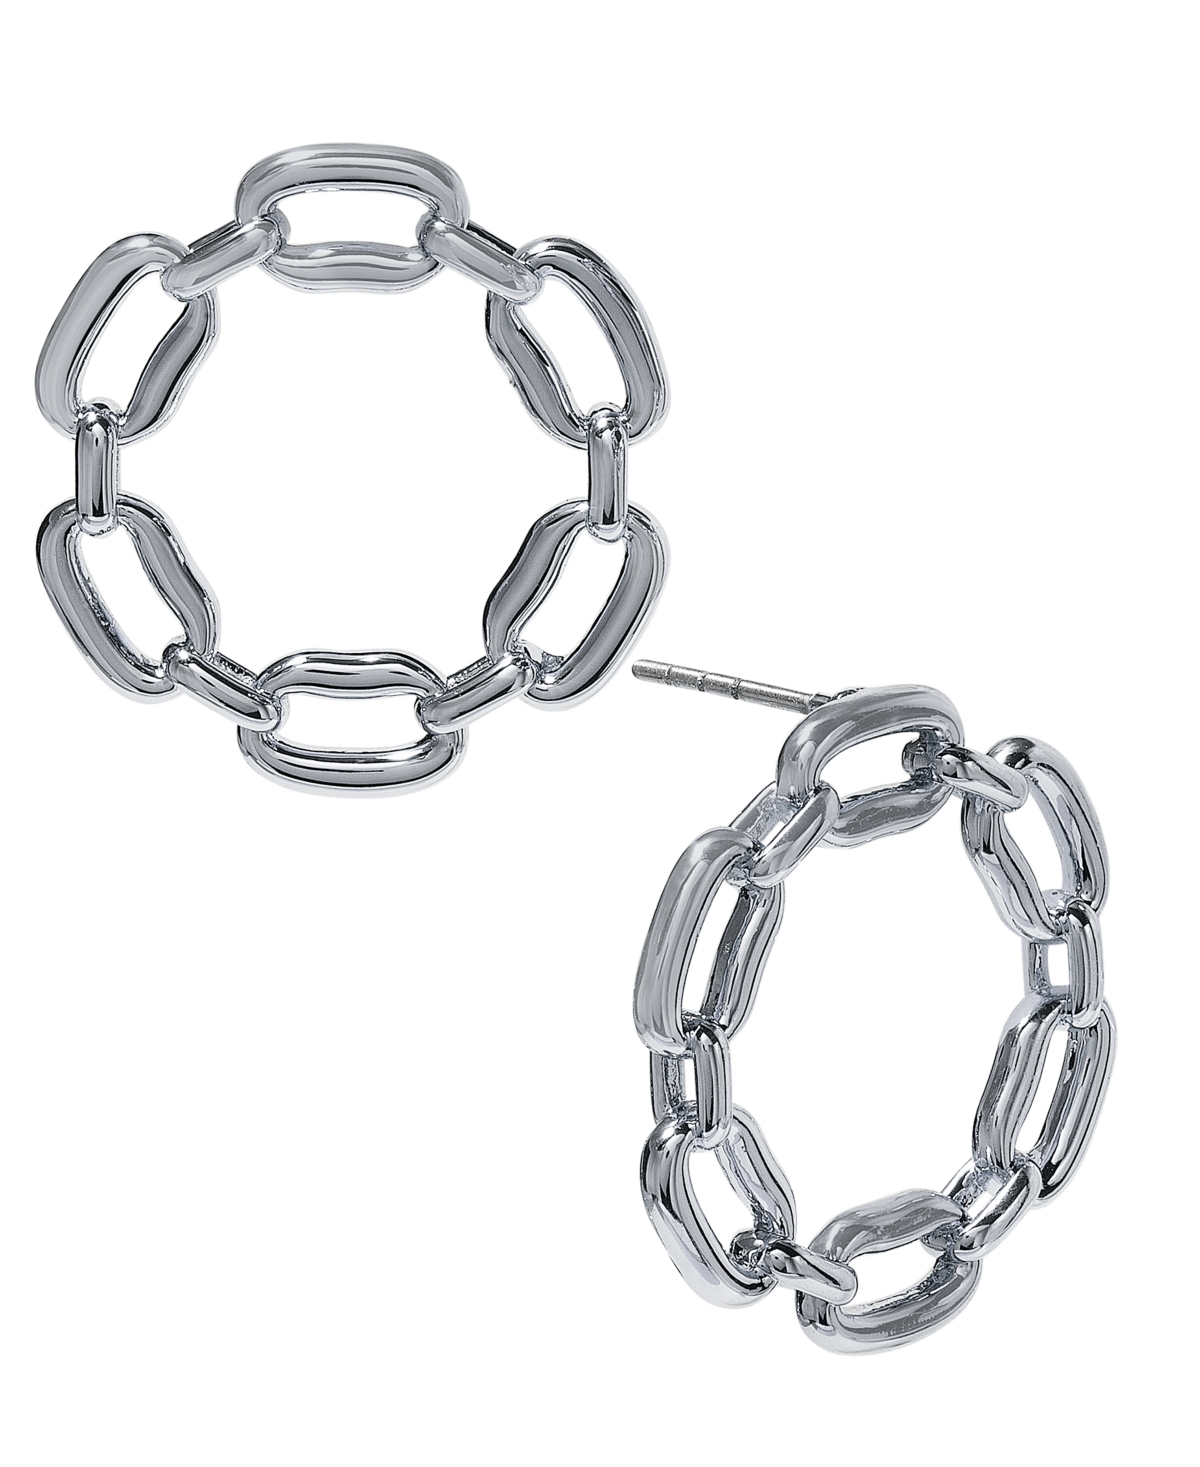 Small Chain Link Front-Facing Hoop Earrings, 0.88", Created for Macy's - Silver